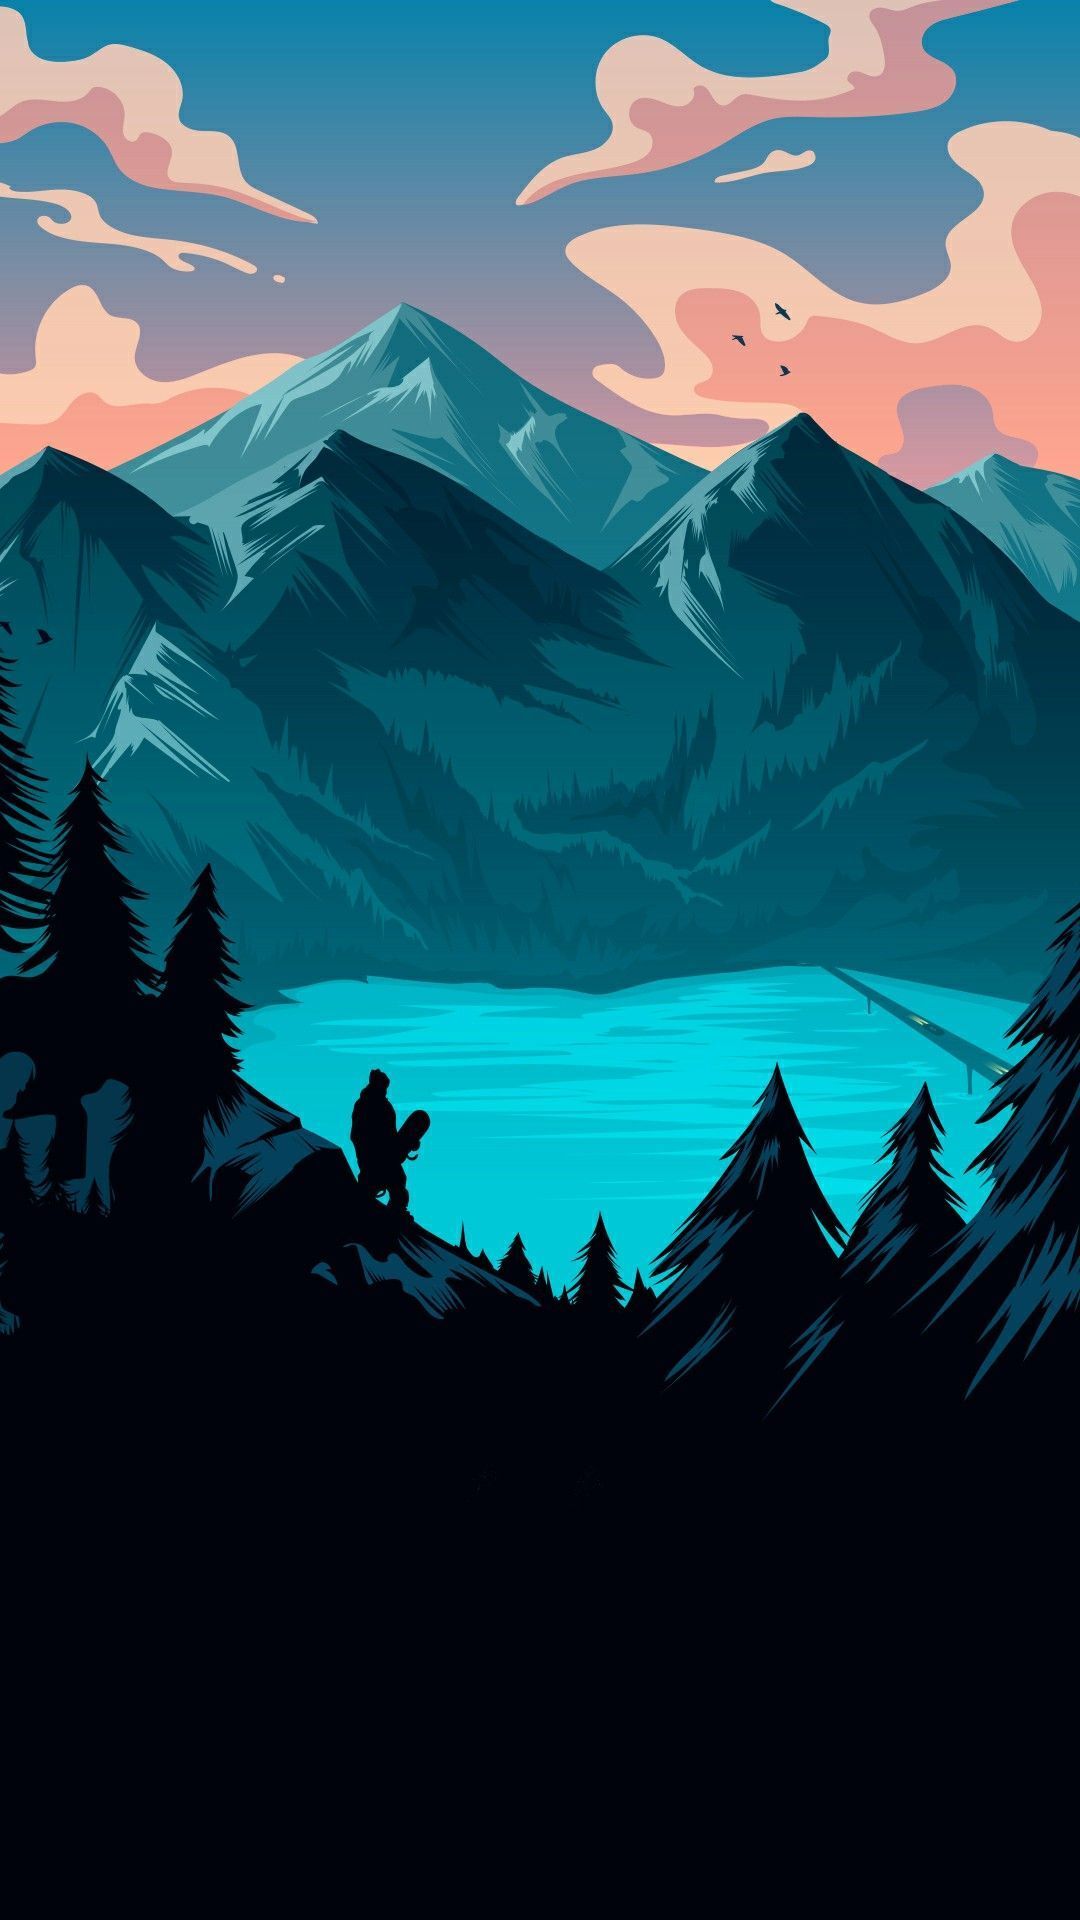 IPhone wallpaper with a landscape of a person sitting on a rock looking at a lake surrounded by trees and mountains - Clean